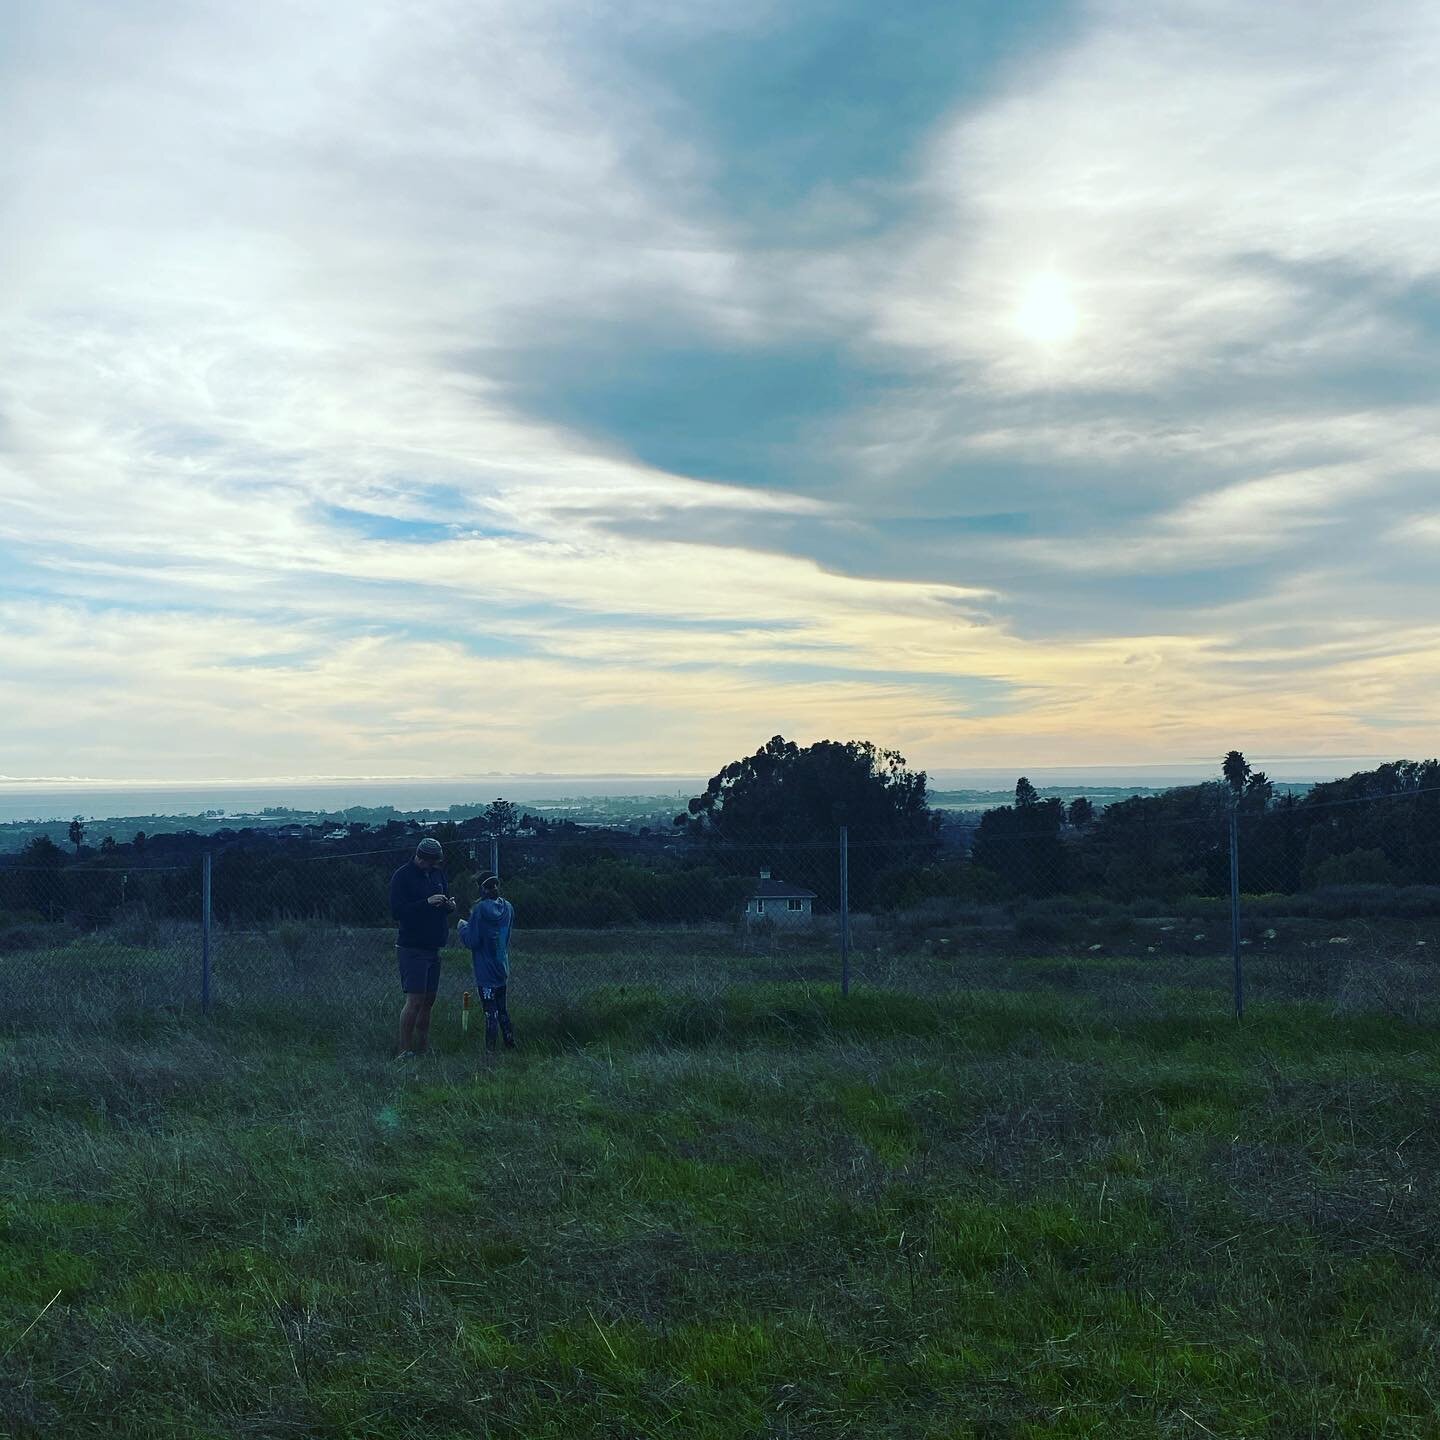 Has anybody been exploring lately? Yesterday I discovered San Marcos Foothills Preserve, found some tadpoles, a few treasures, and a great sunset! 

#santabarbarasunset #wearingmyhoodie #santabarbarahikes #wearreallife #sanmarcosfoothillspreserve #ge